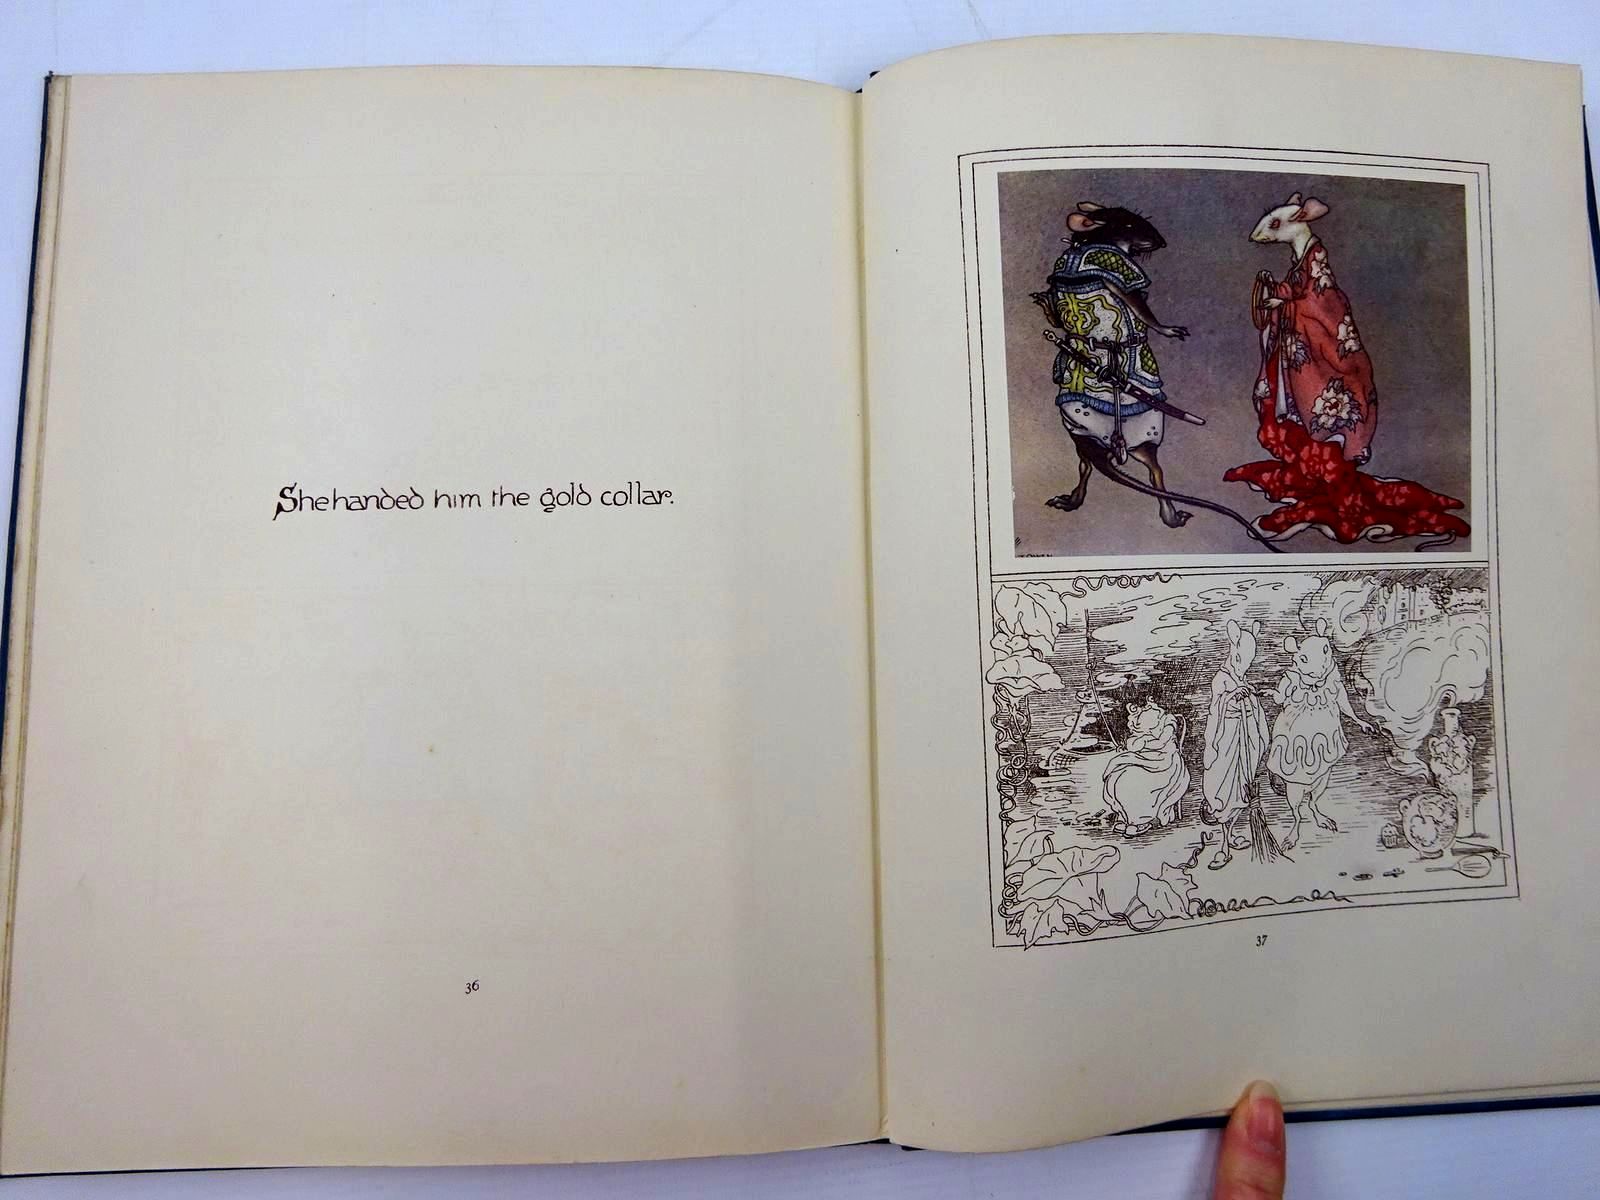 Photo of THE ROBBER BRIDEGROOM written by Grimm, Brothers illustrated by Owen, H.J. published by A. & C. Black Ltd. (STOCK CODE: 2131078)  for sale by Stella & Rose's Books